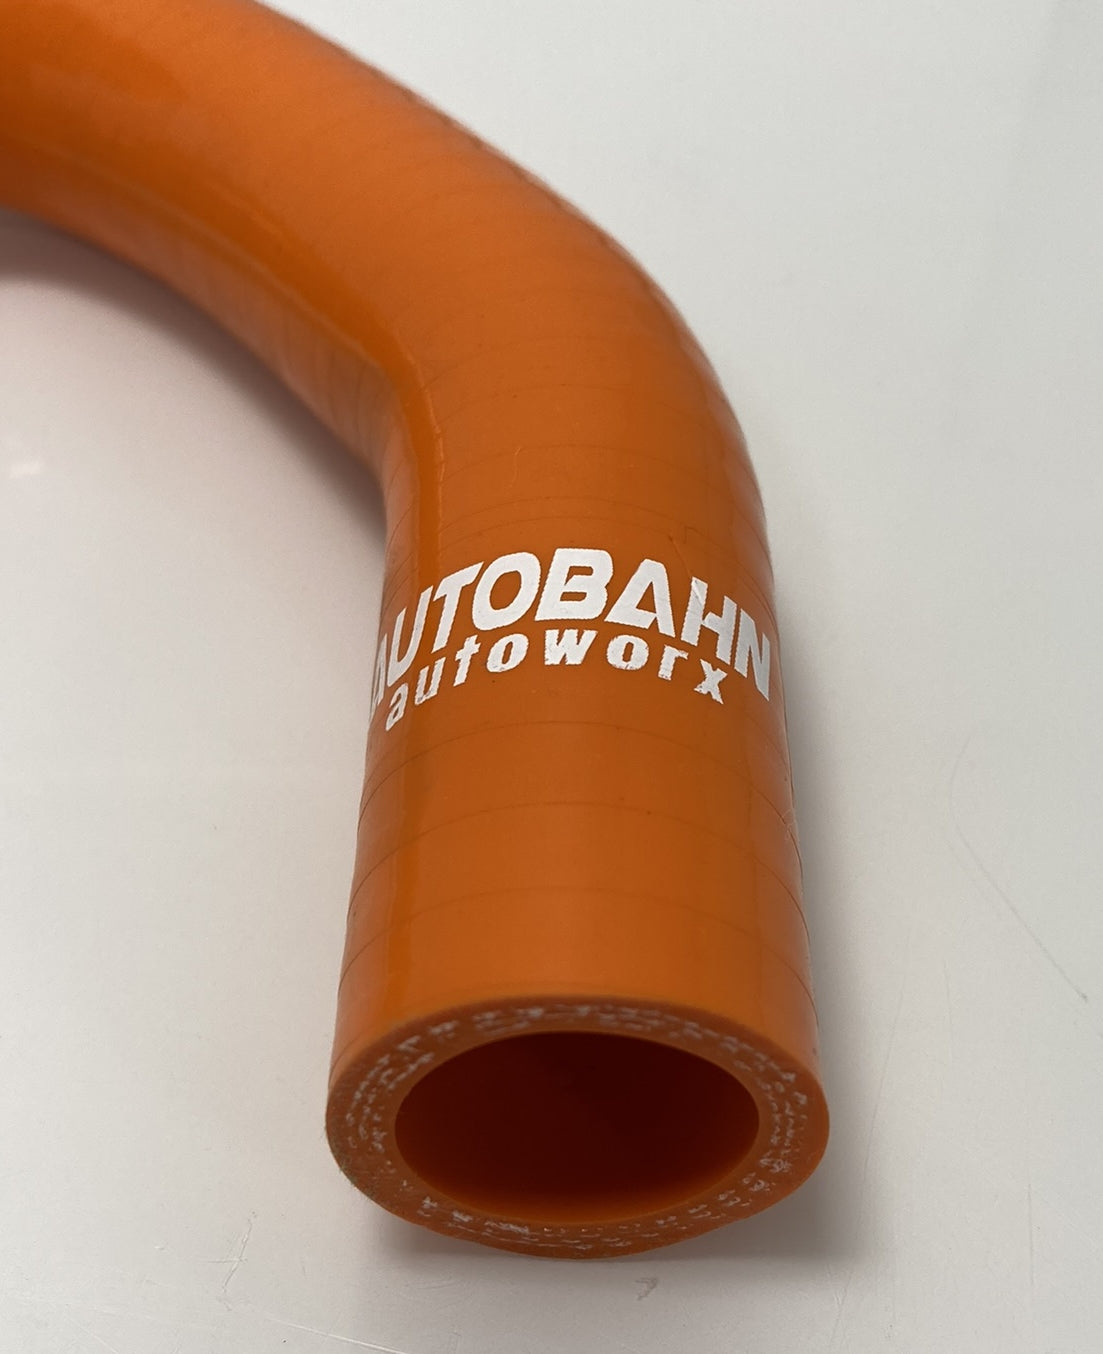 Special Order Intake/Inlet Pipes and Boost Hose Kits